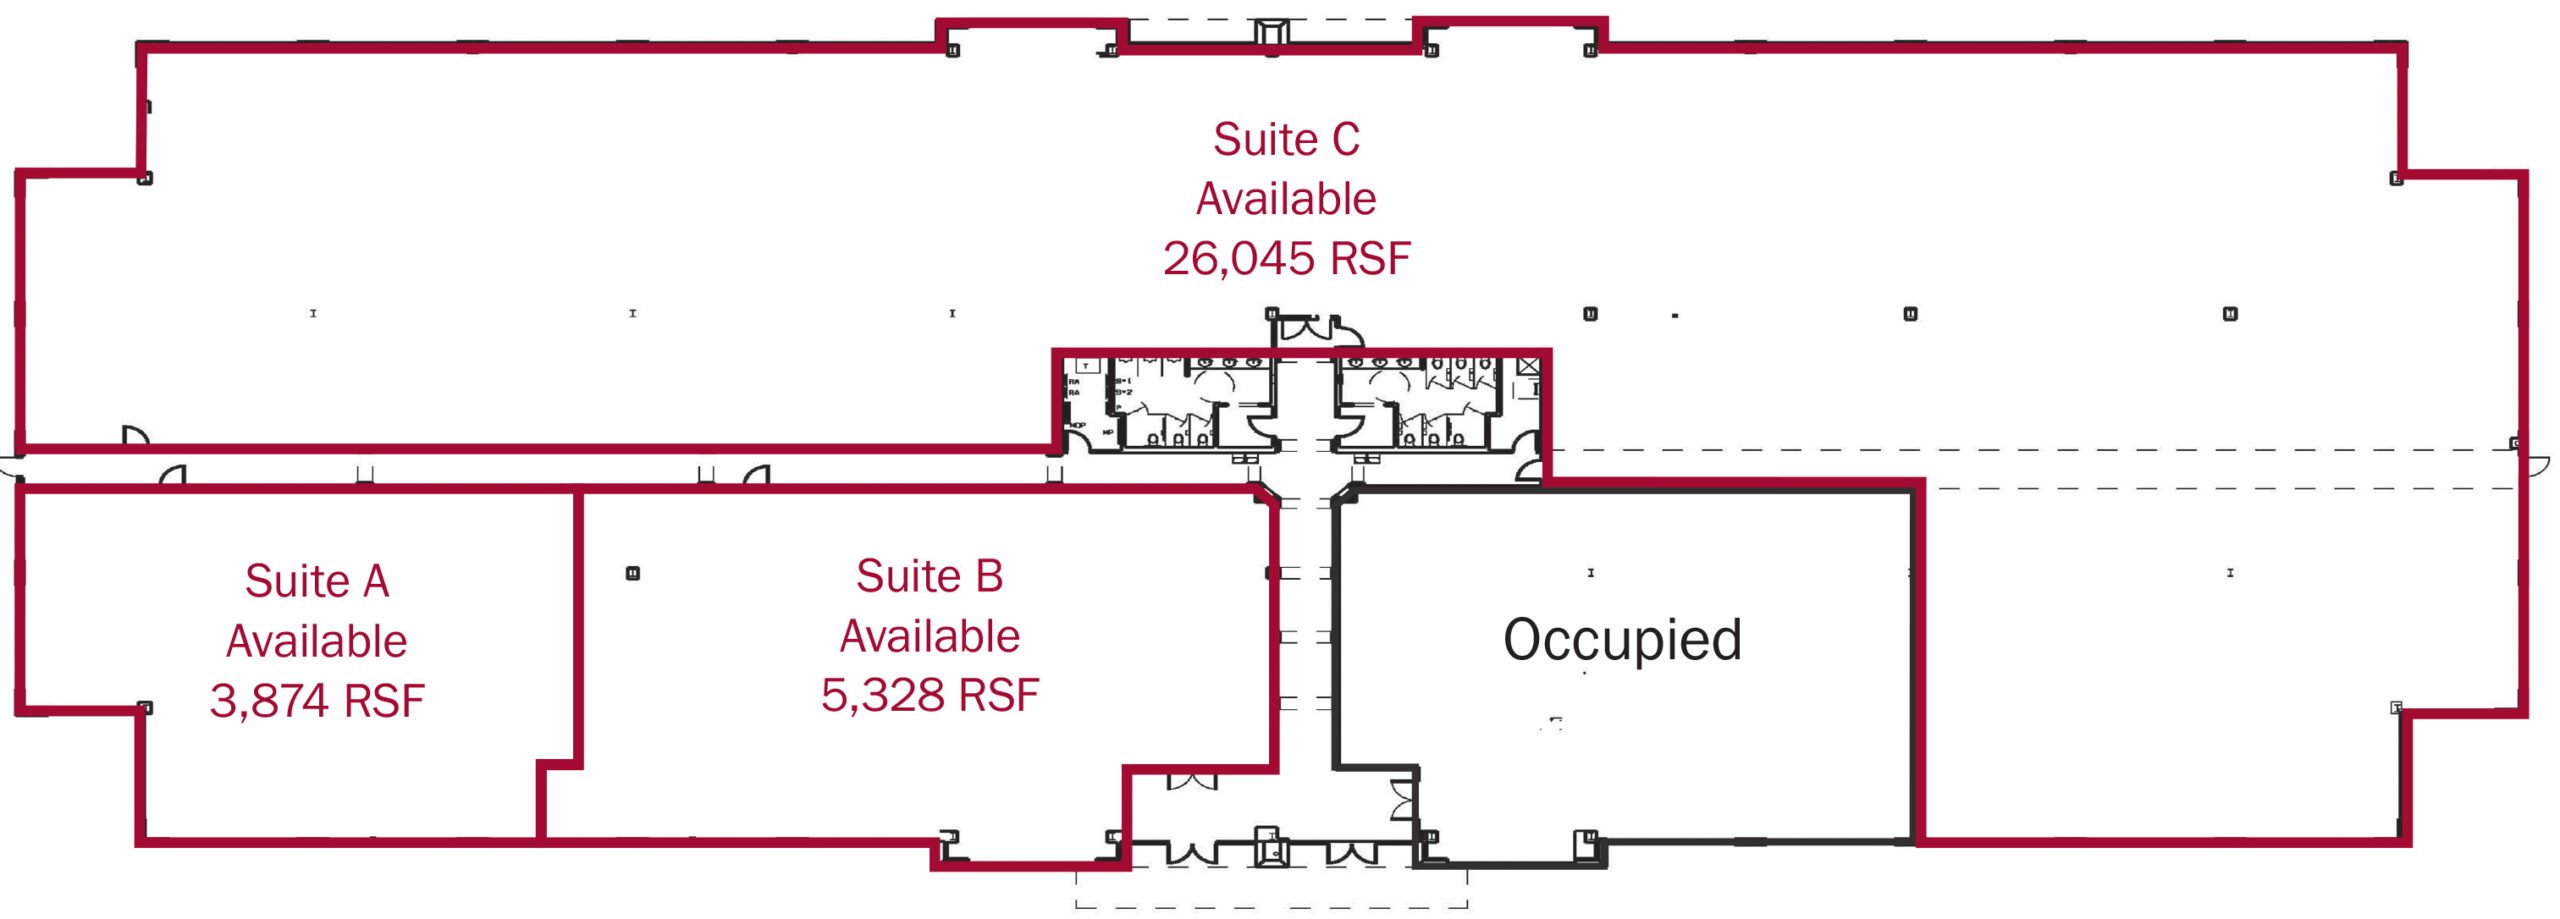 Floorplan of available space for Wellman Corporate Center